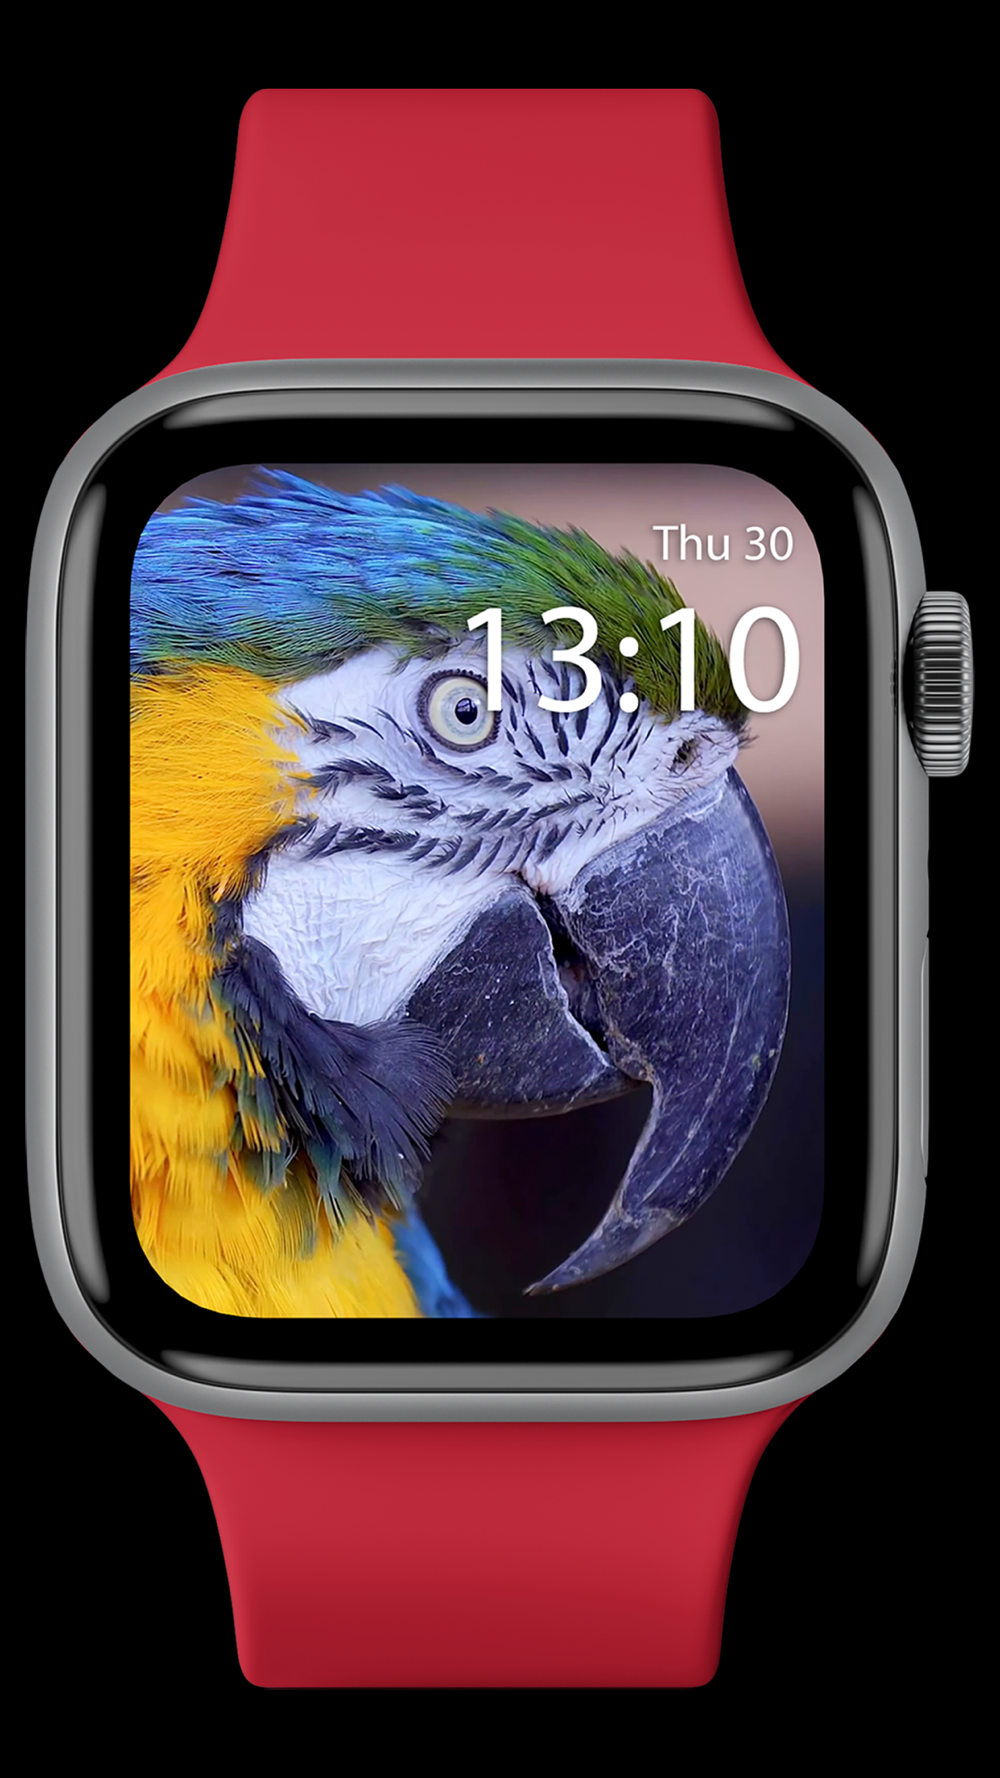 Live Watch Faces Free Download App for iPhone 